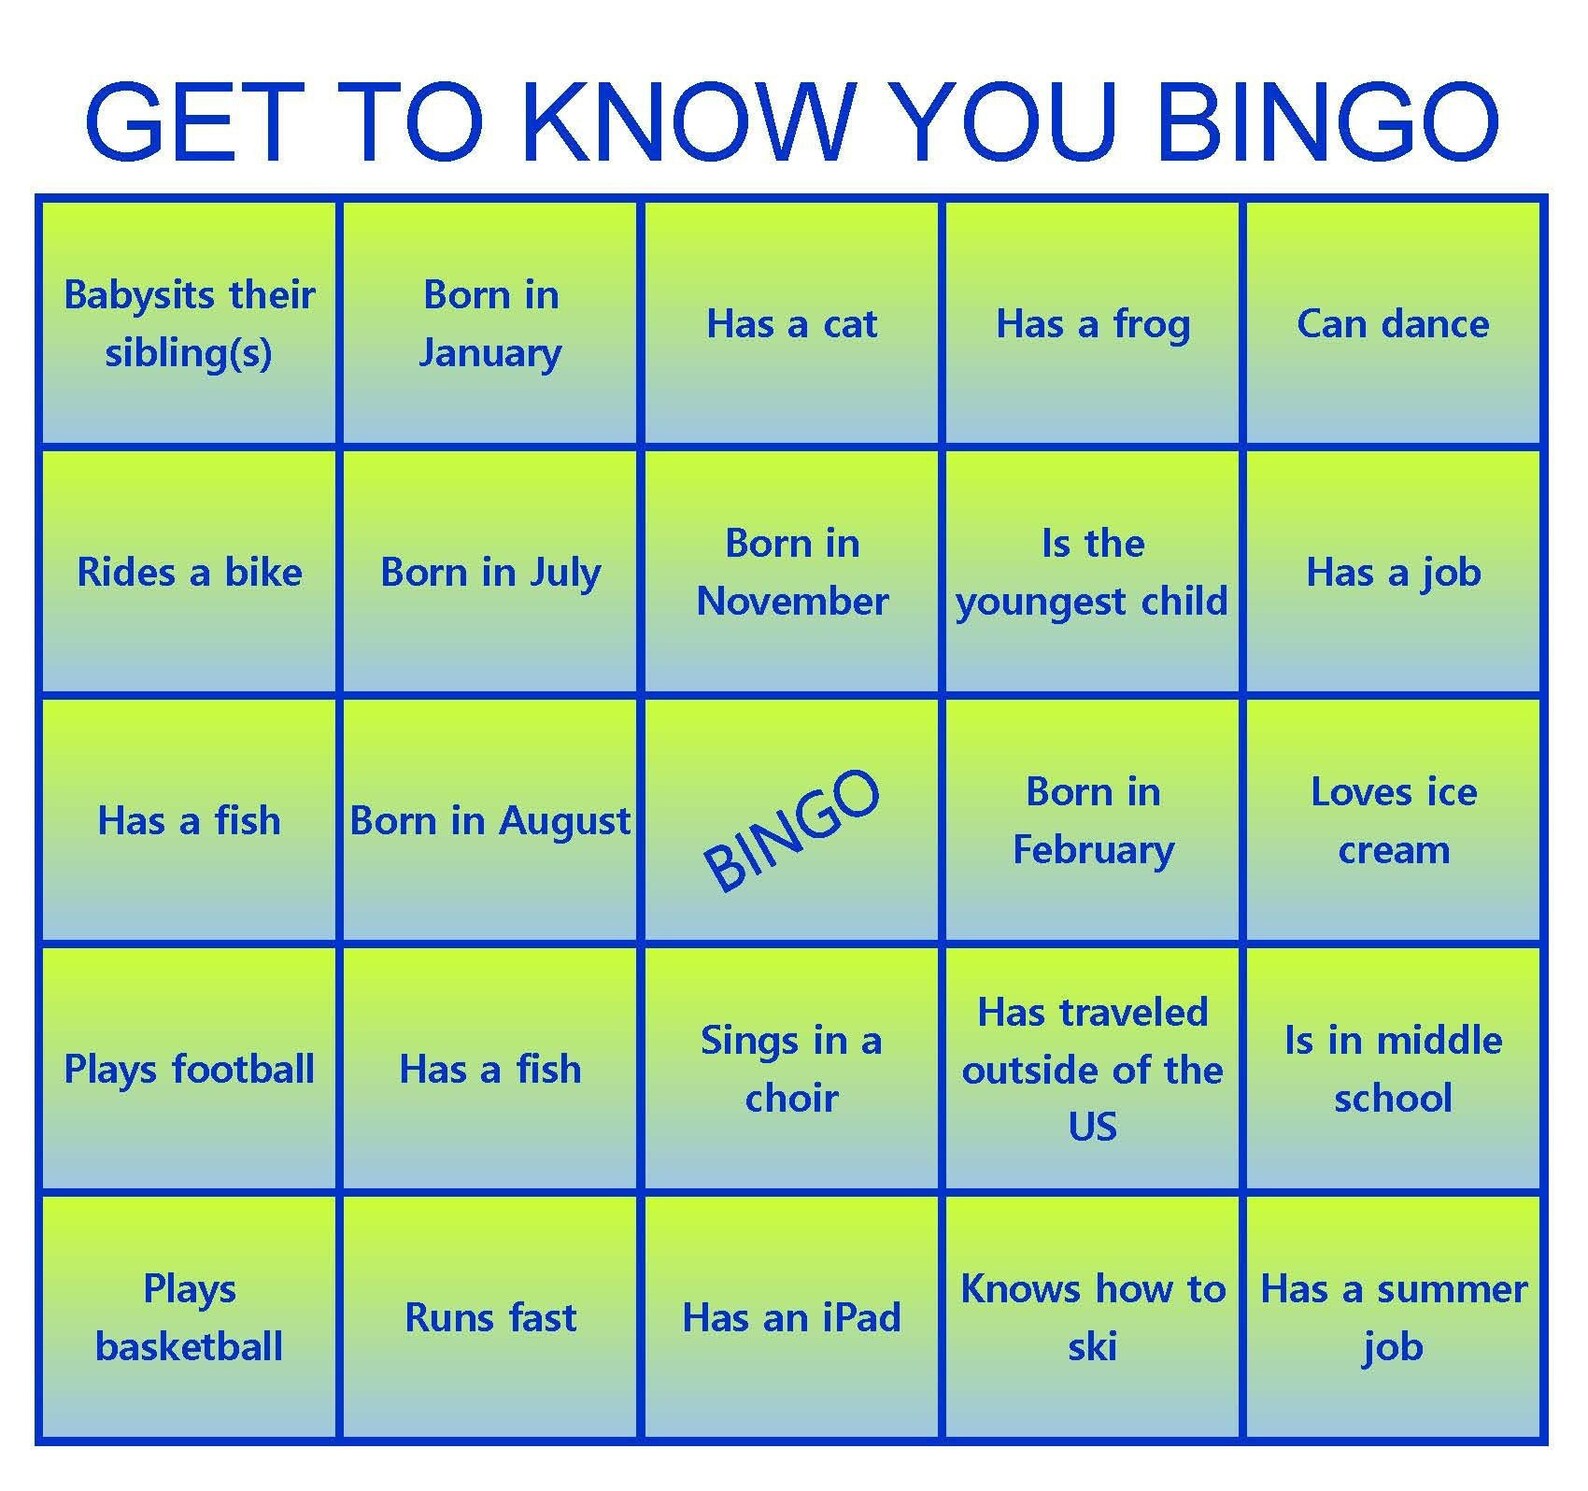 Get to know games. Get to know you Bingo. Get to know you Bingo for Kids. Get to know each other Bingo. Bingo activities.